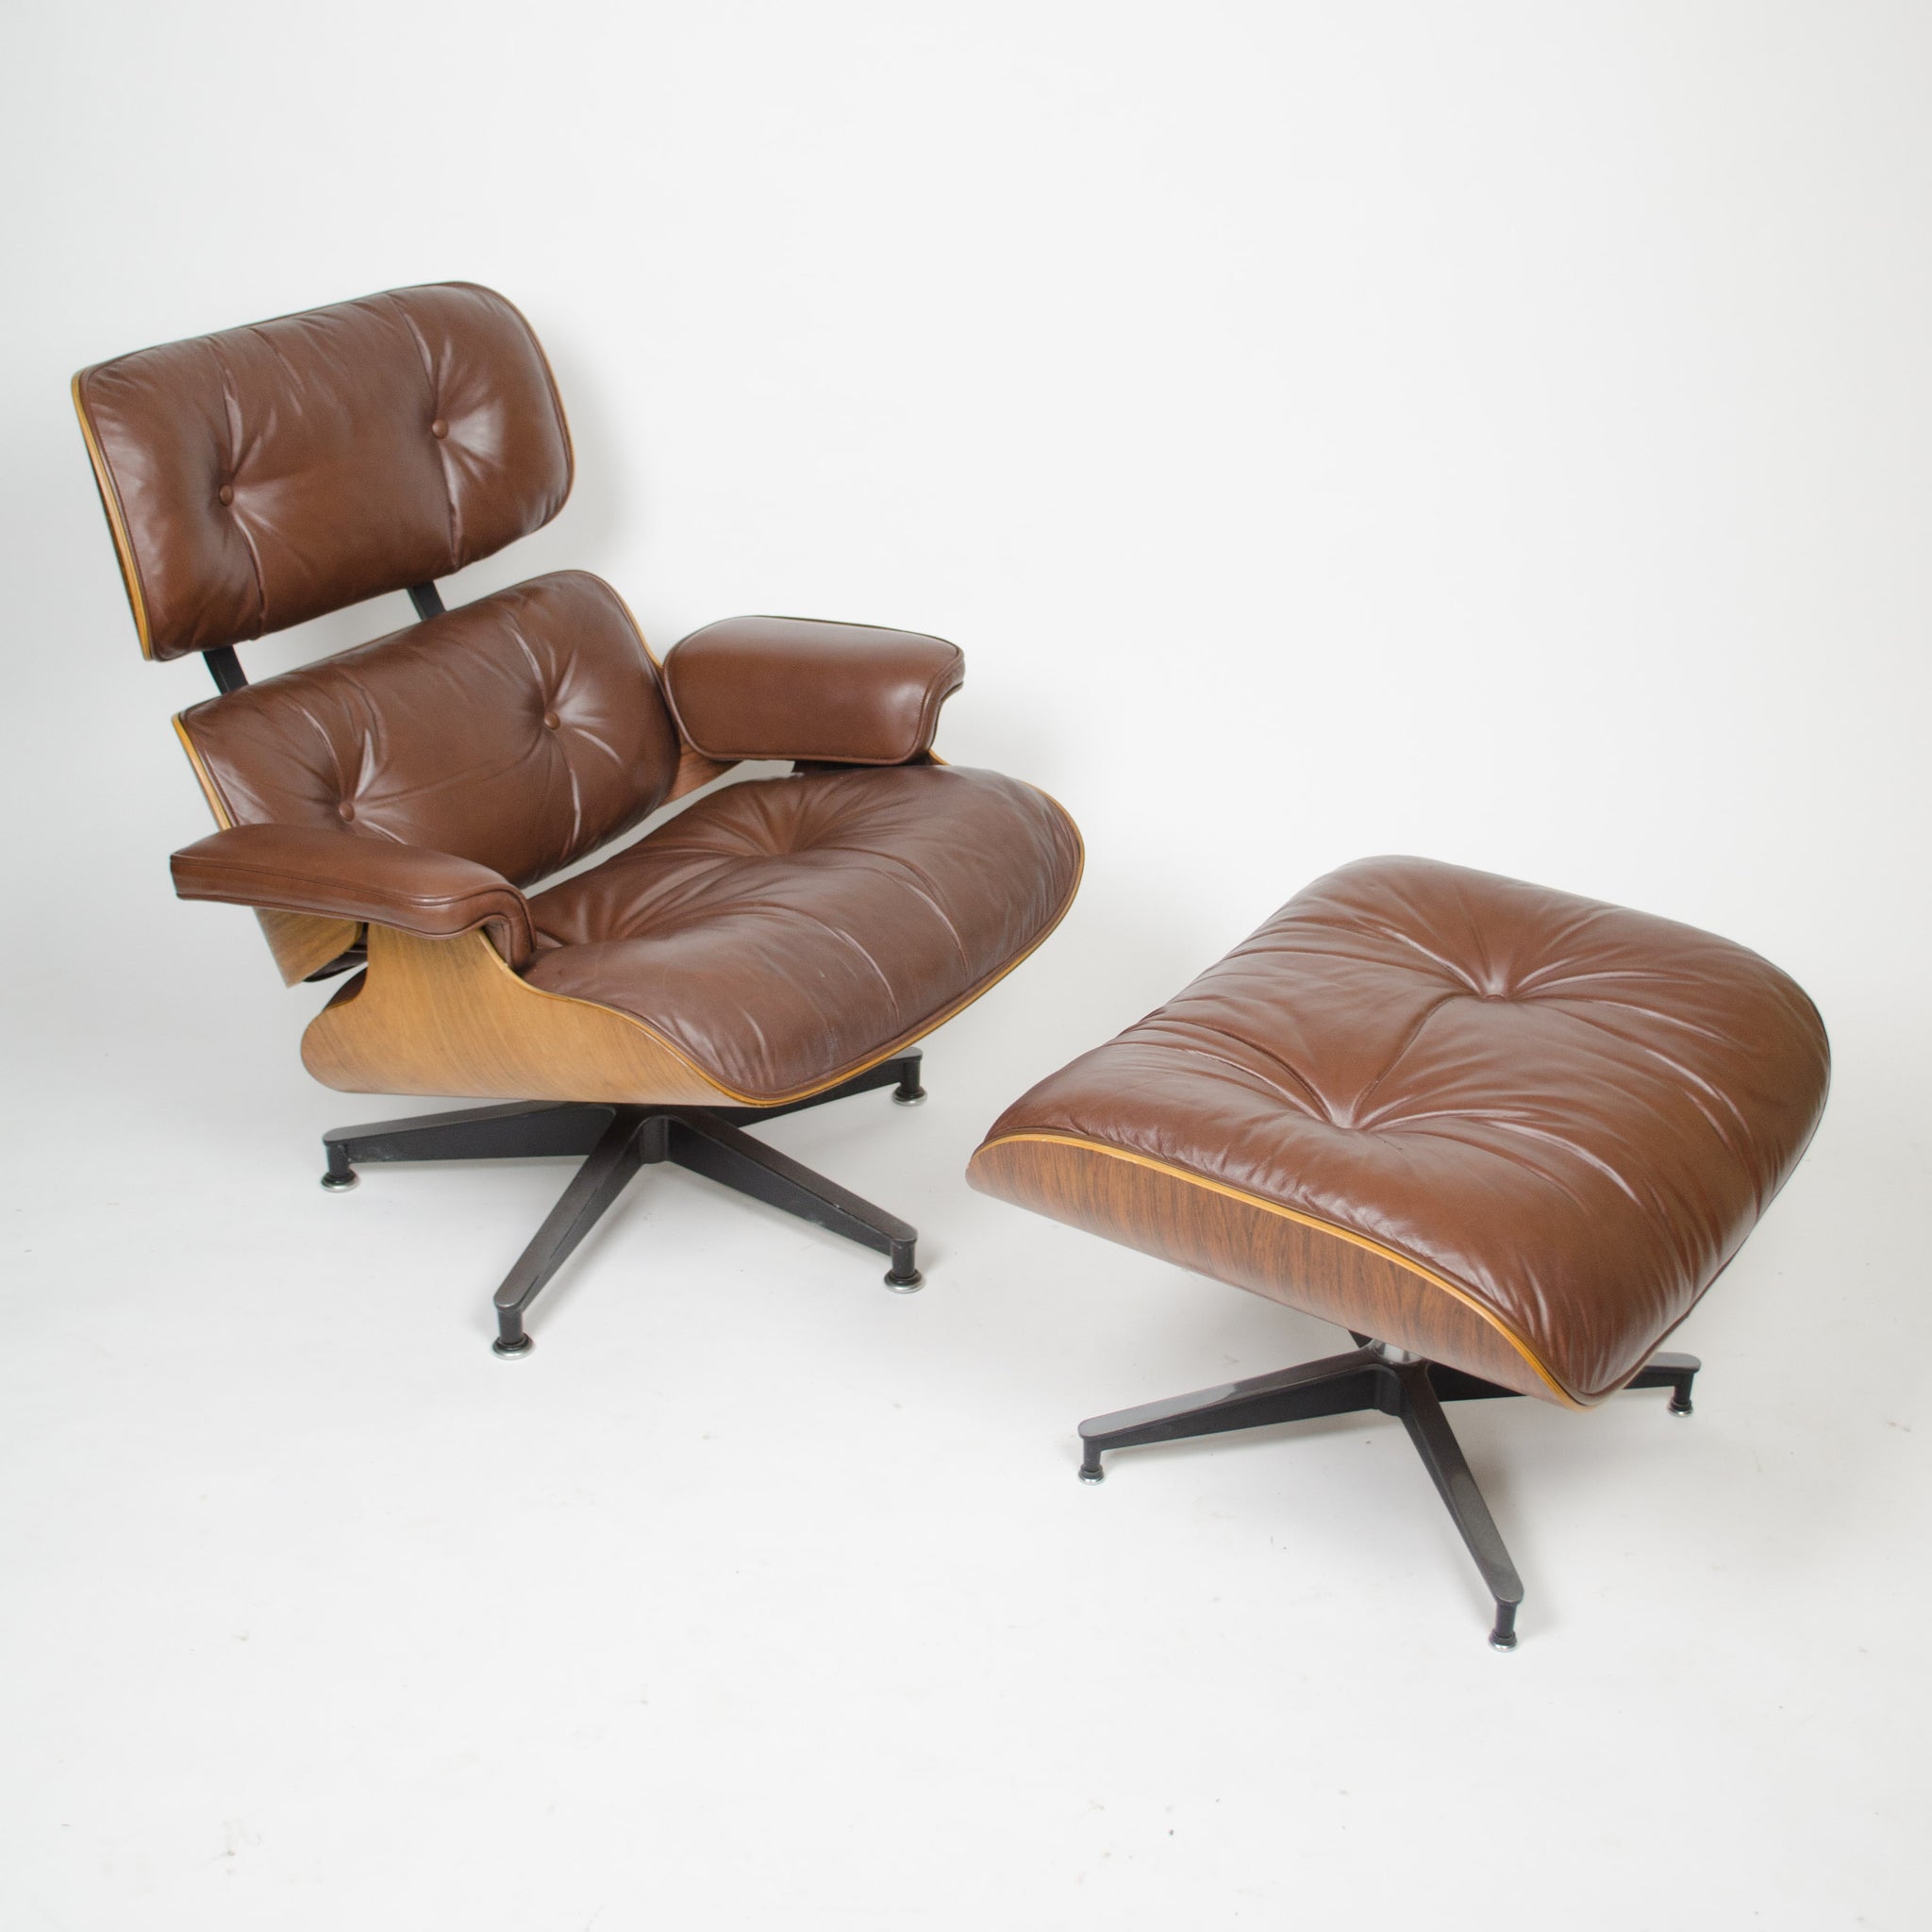 SOLD 1970's Herman Miller Eames Lounge Chair & Ottoman Rosewood 670 671 Brown Leather